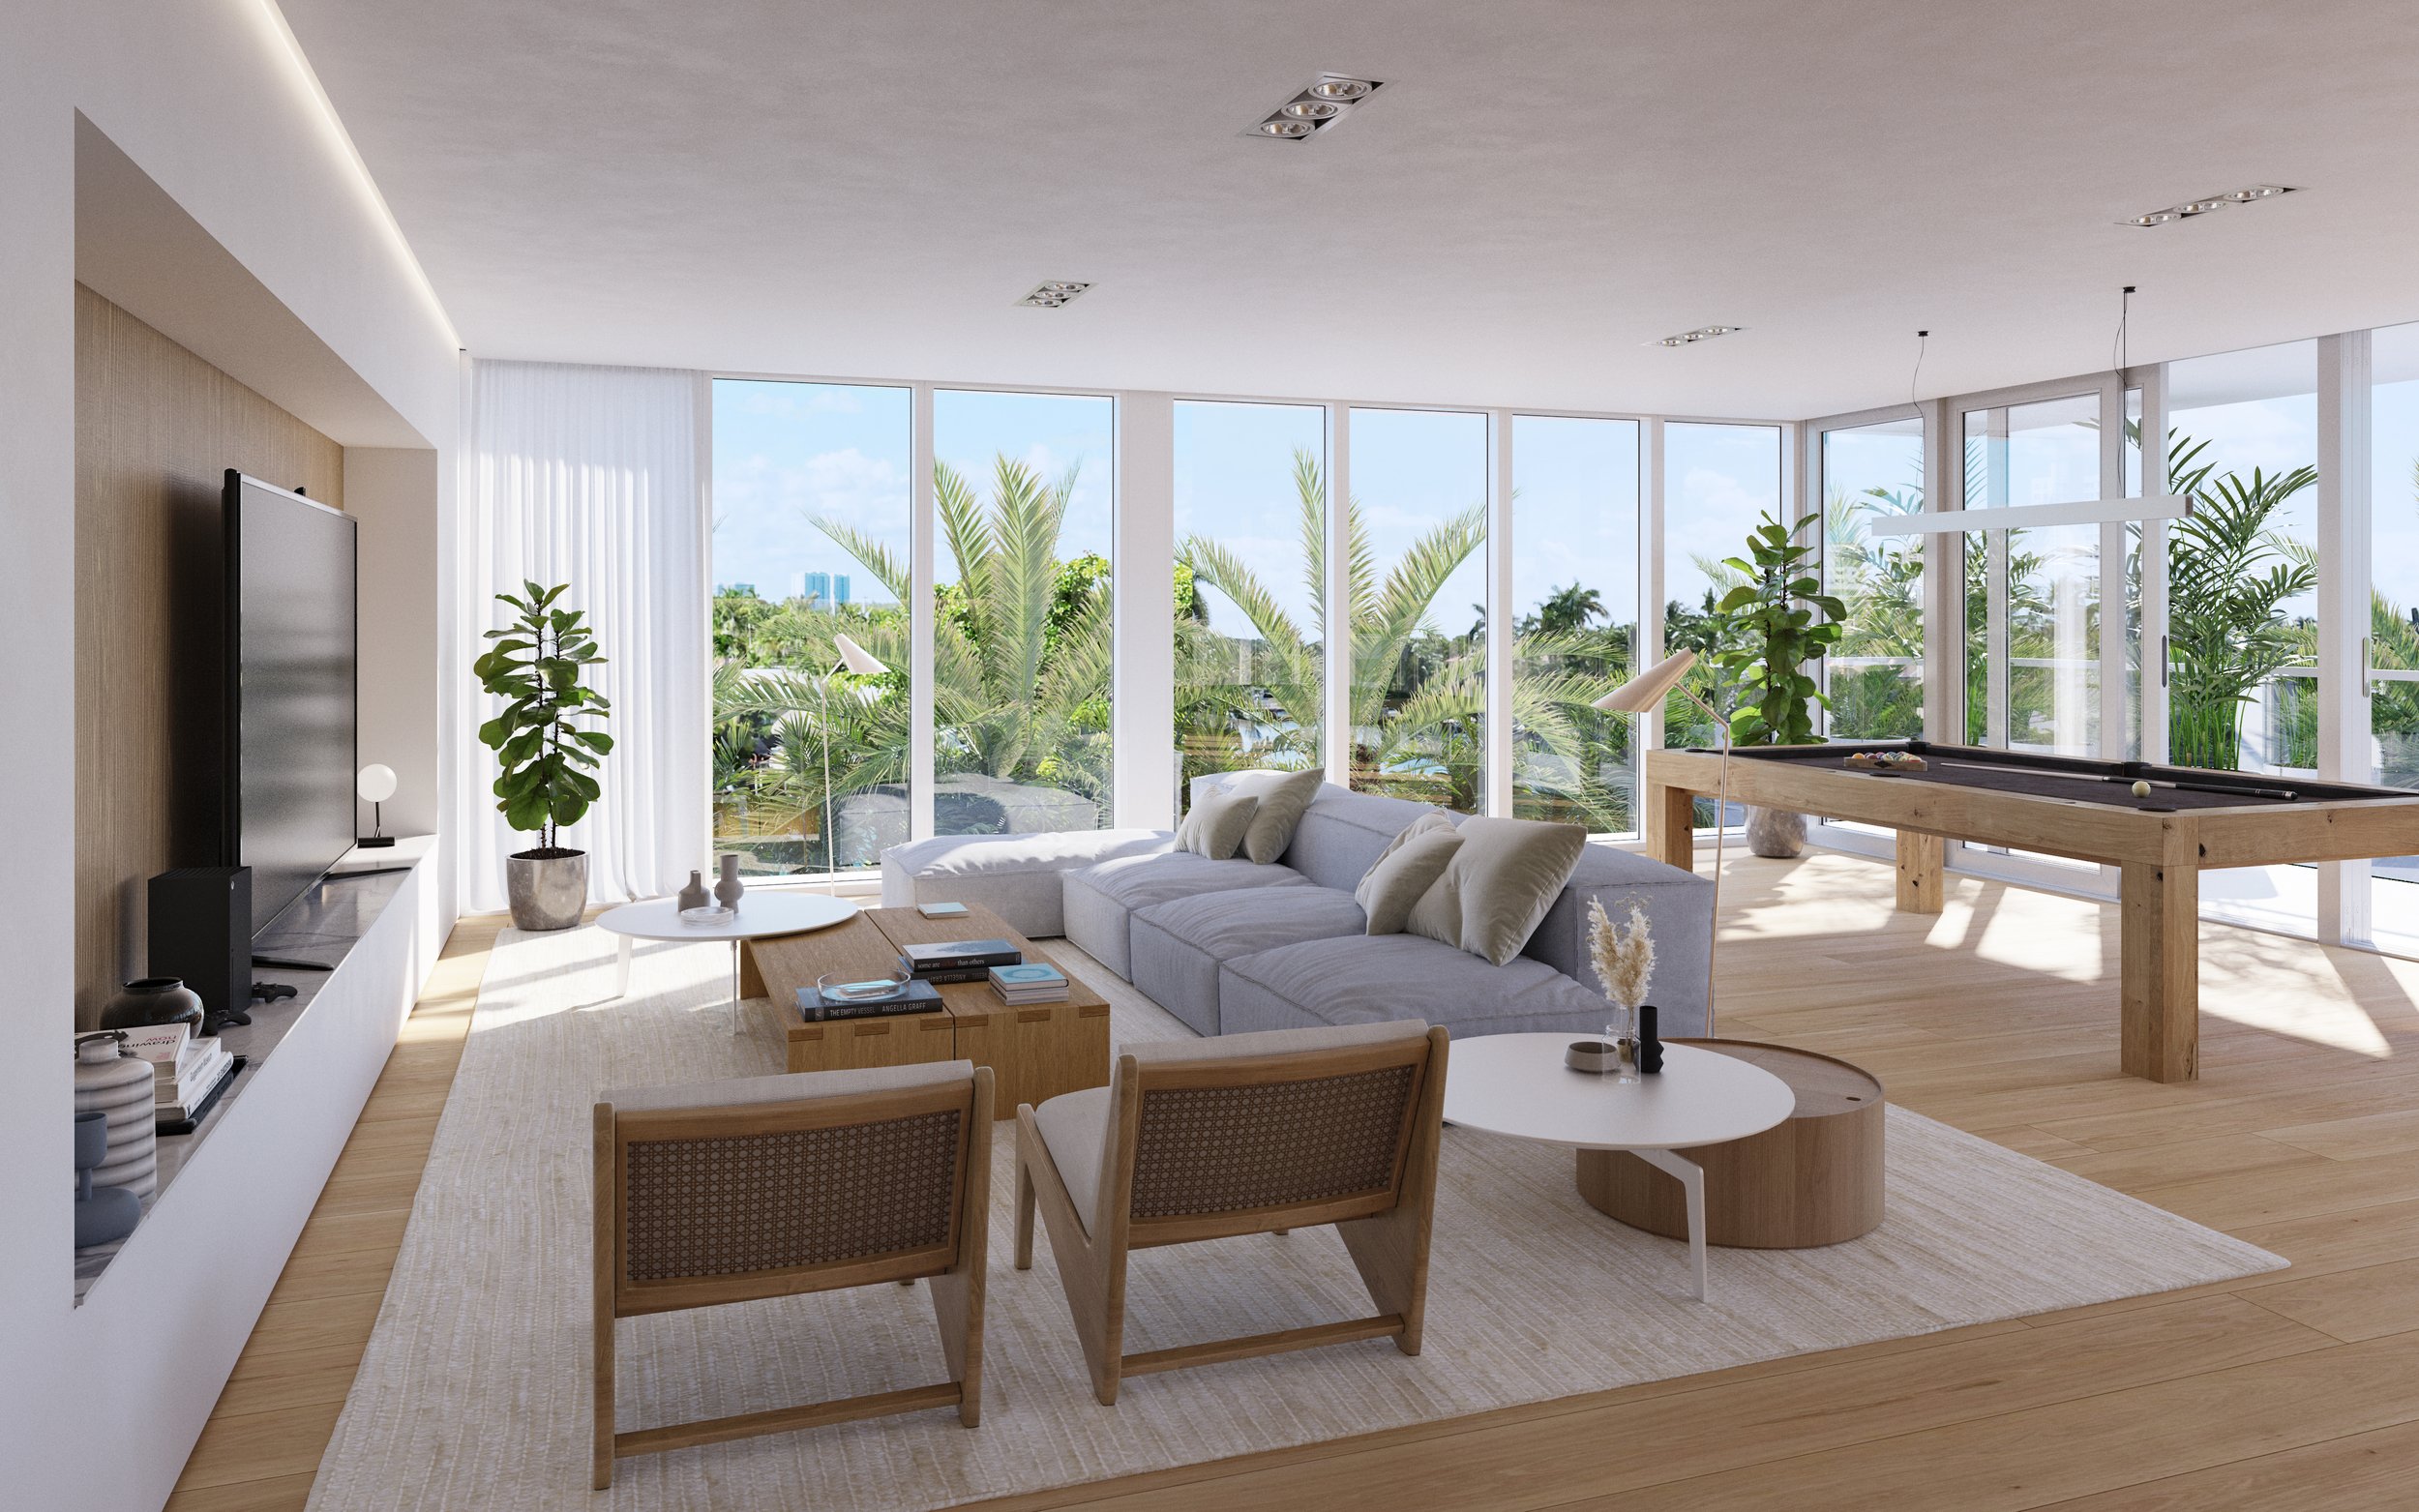 New York-Based Developer The Horizon Group Launches Sales For 9900 West Condominium On The Bay Harbor Islands 3.jpg